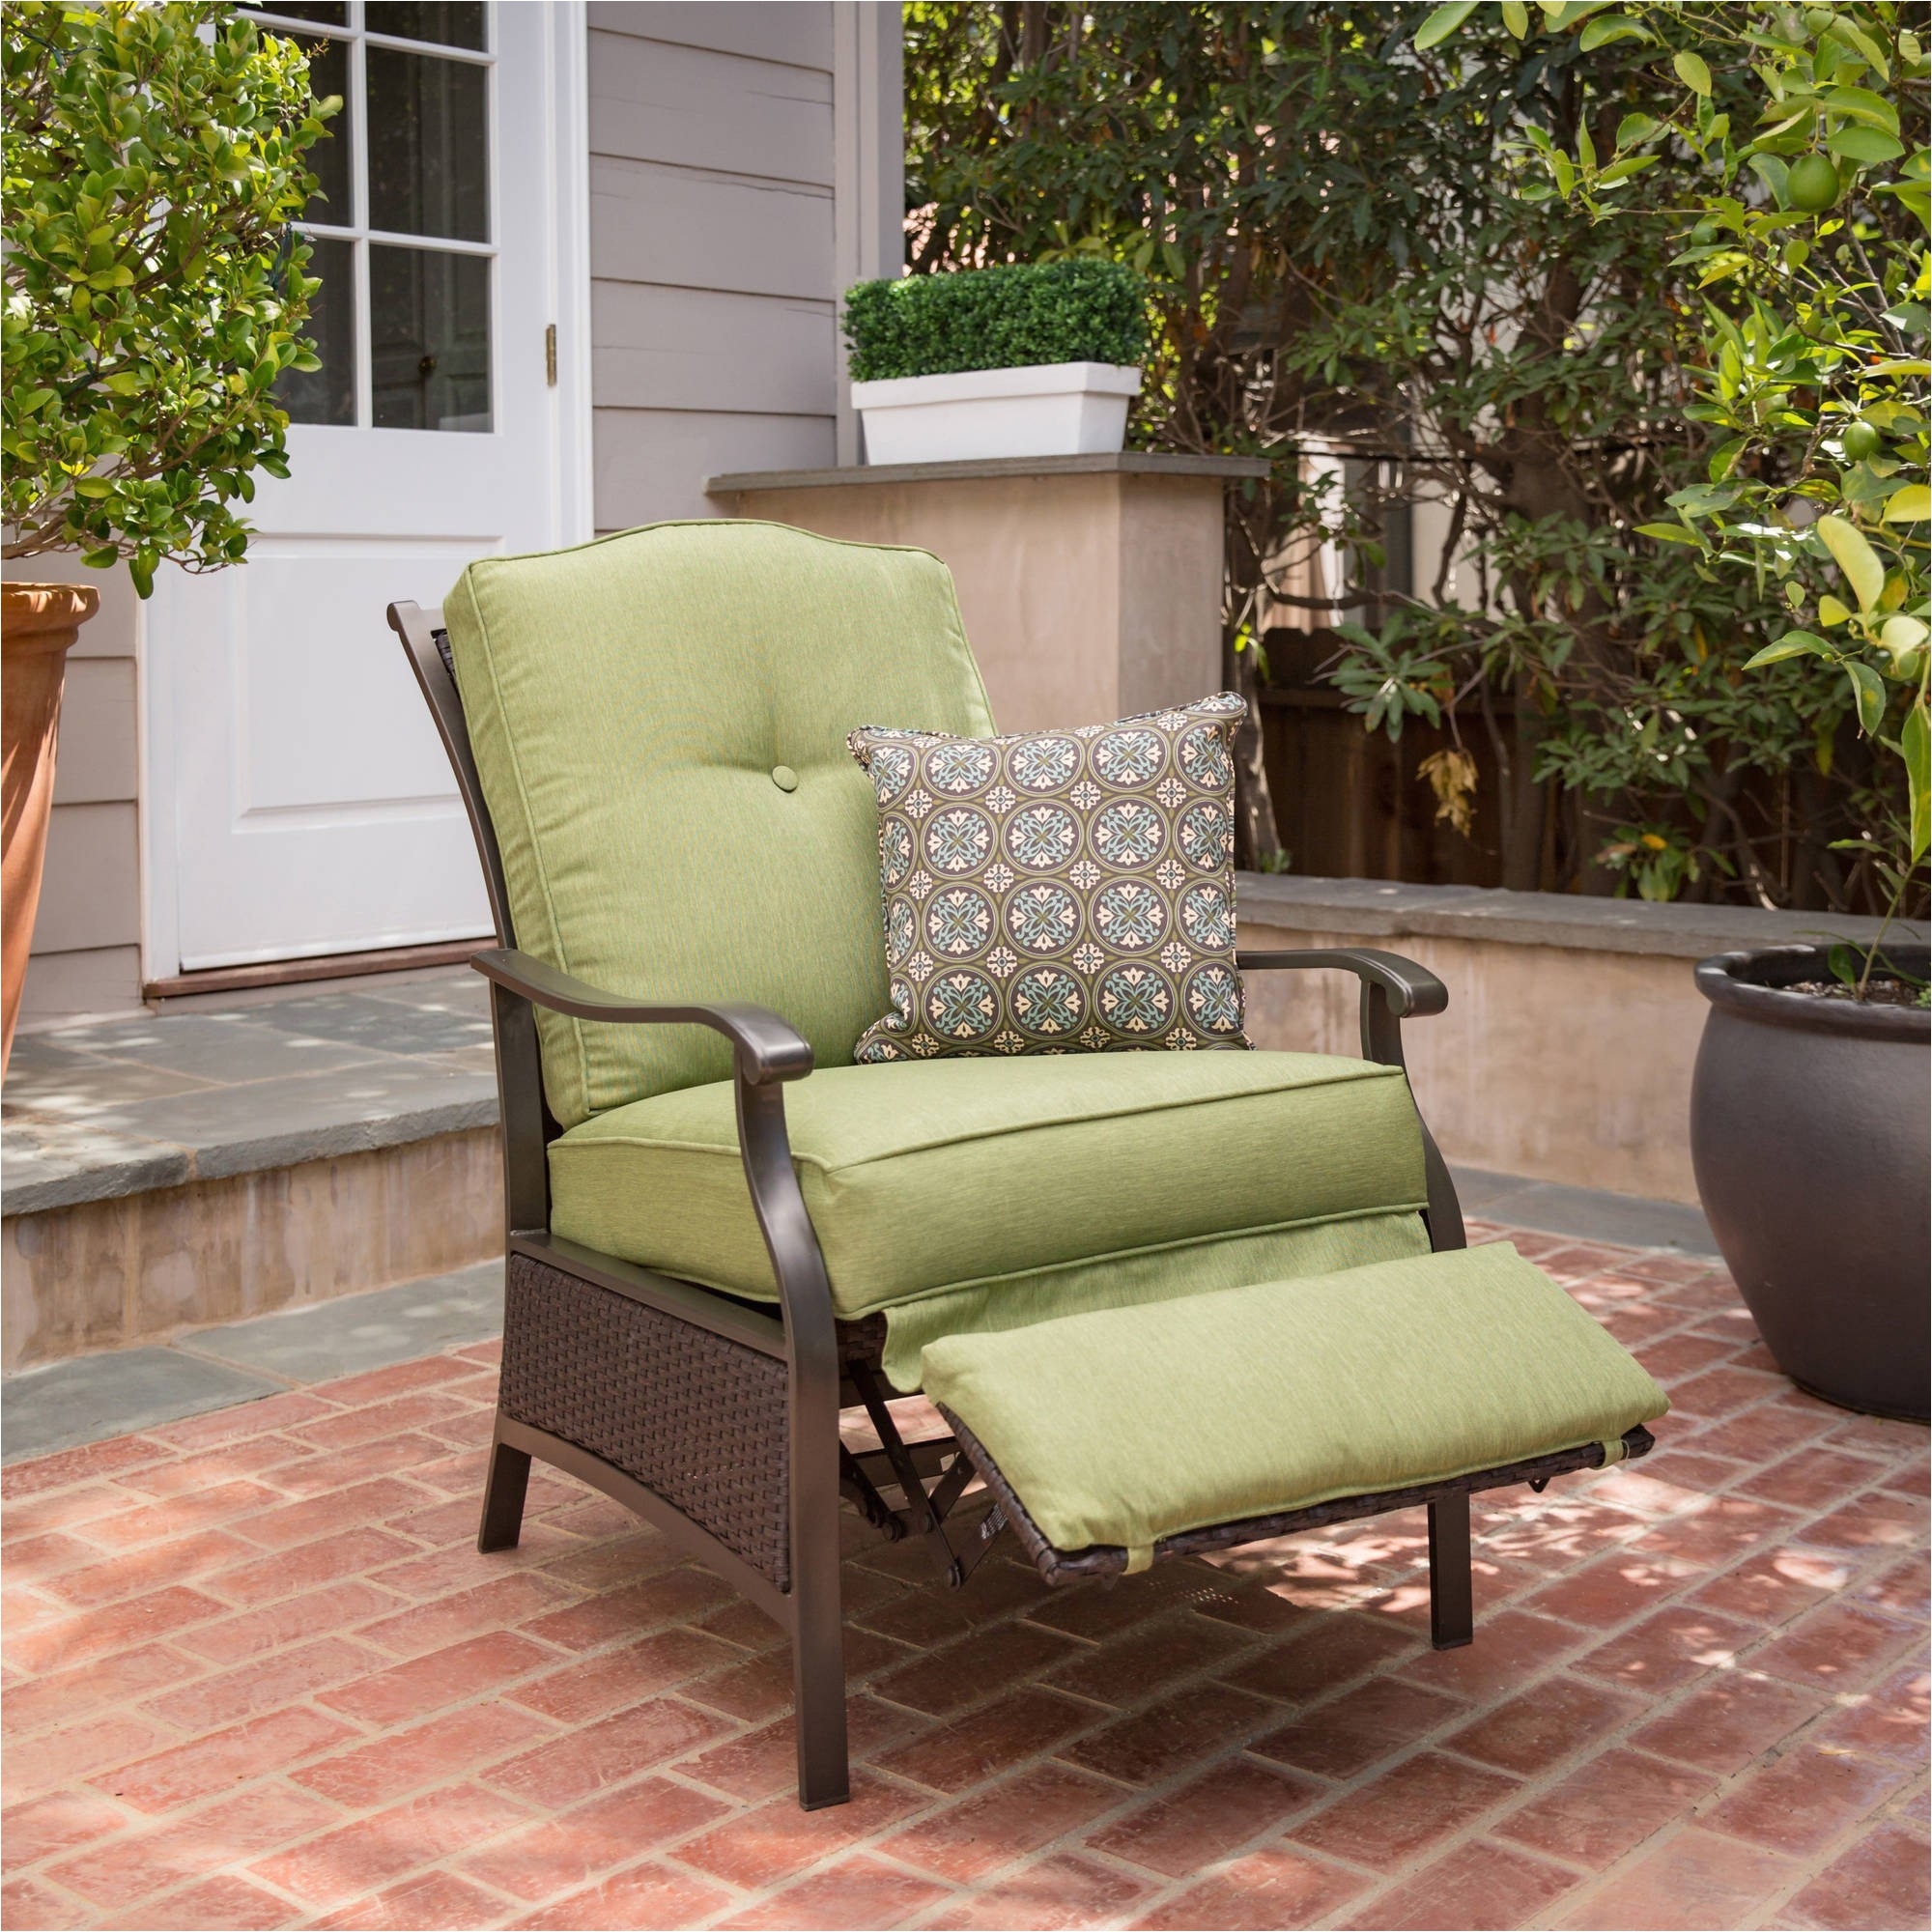 Lawn Chairs at Lowes Home Design Lowes Outdoor Patio Furniture Lovely 30 top Cheap